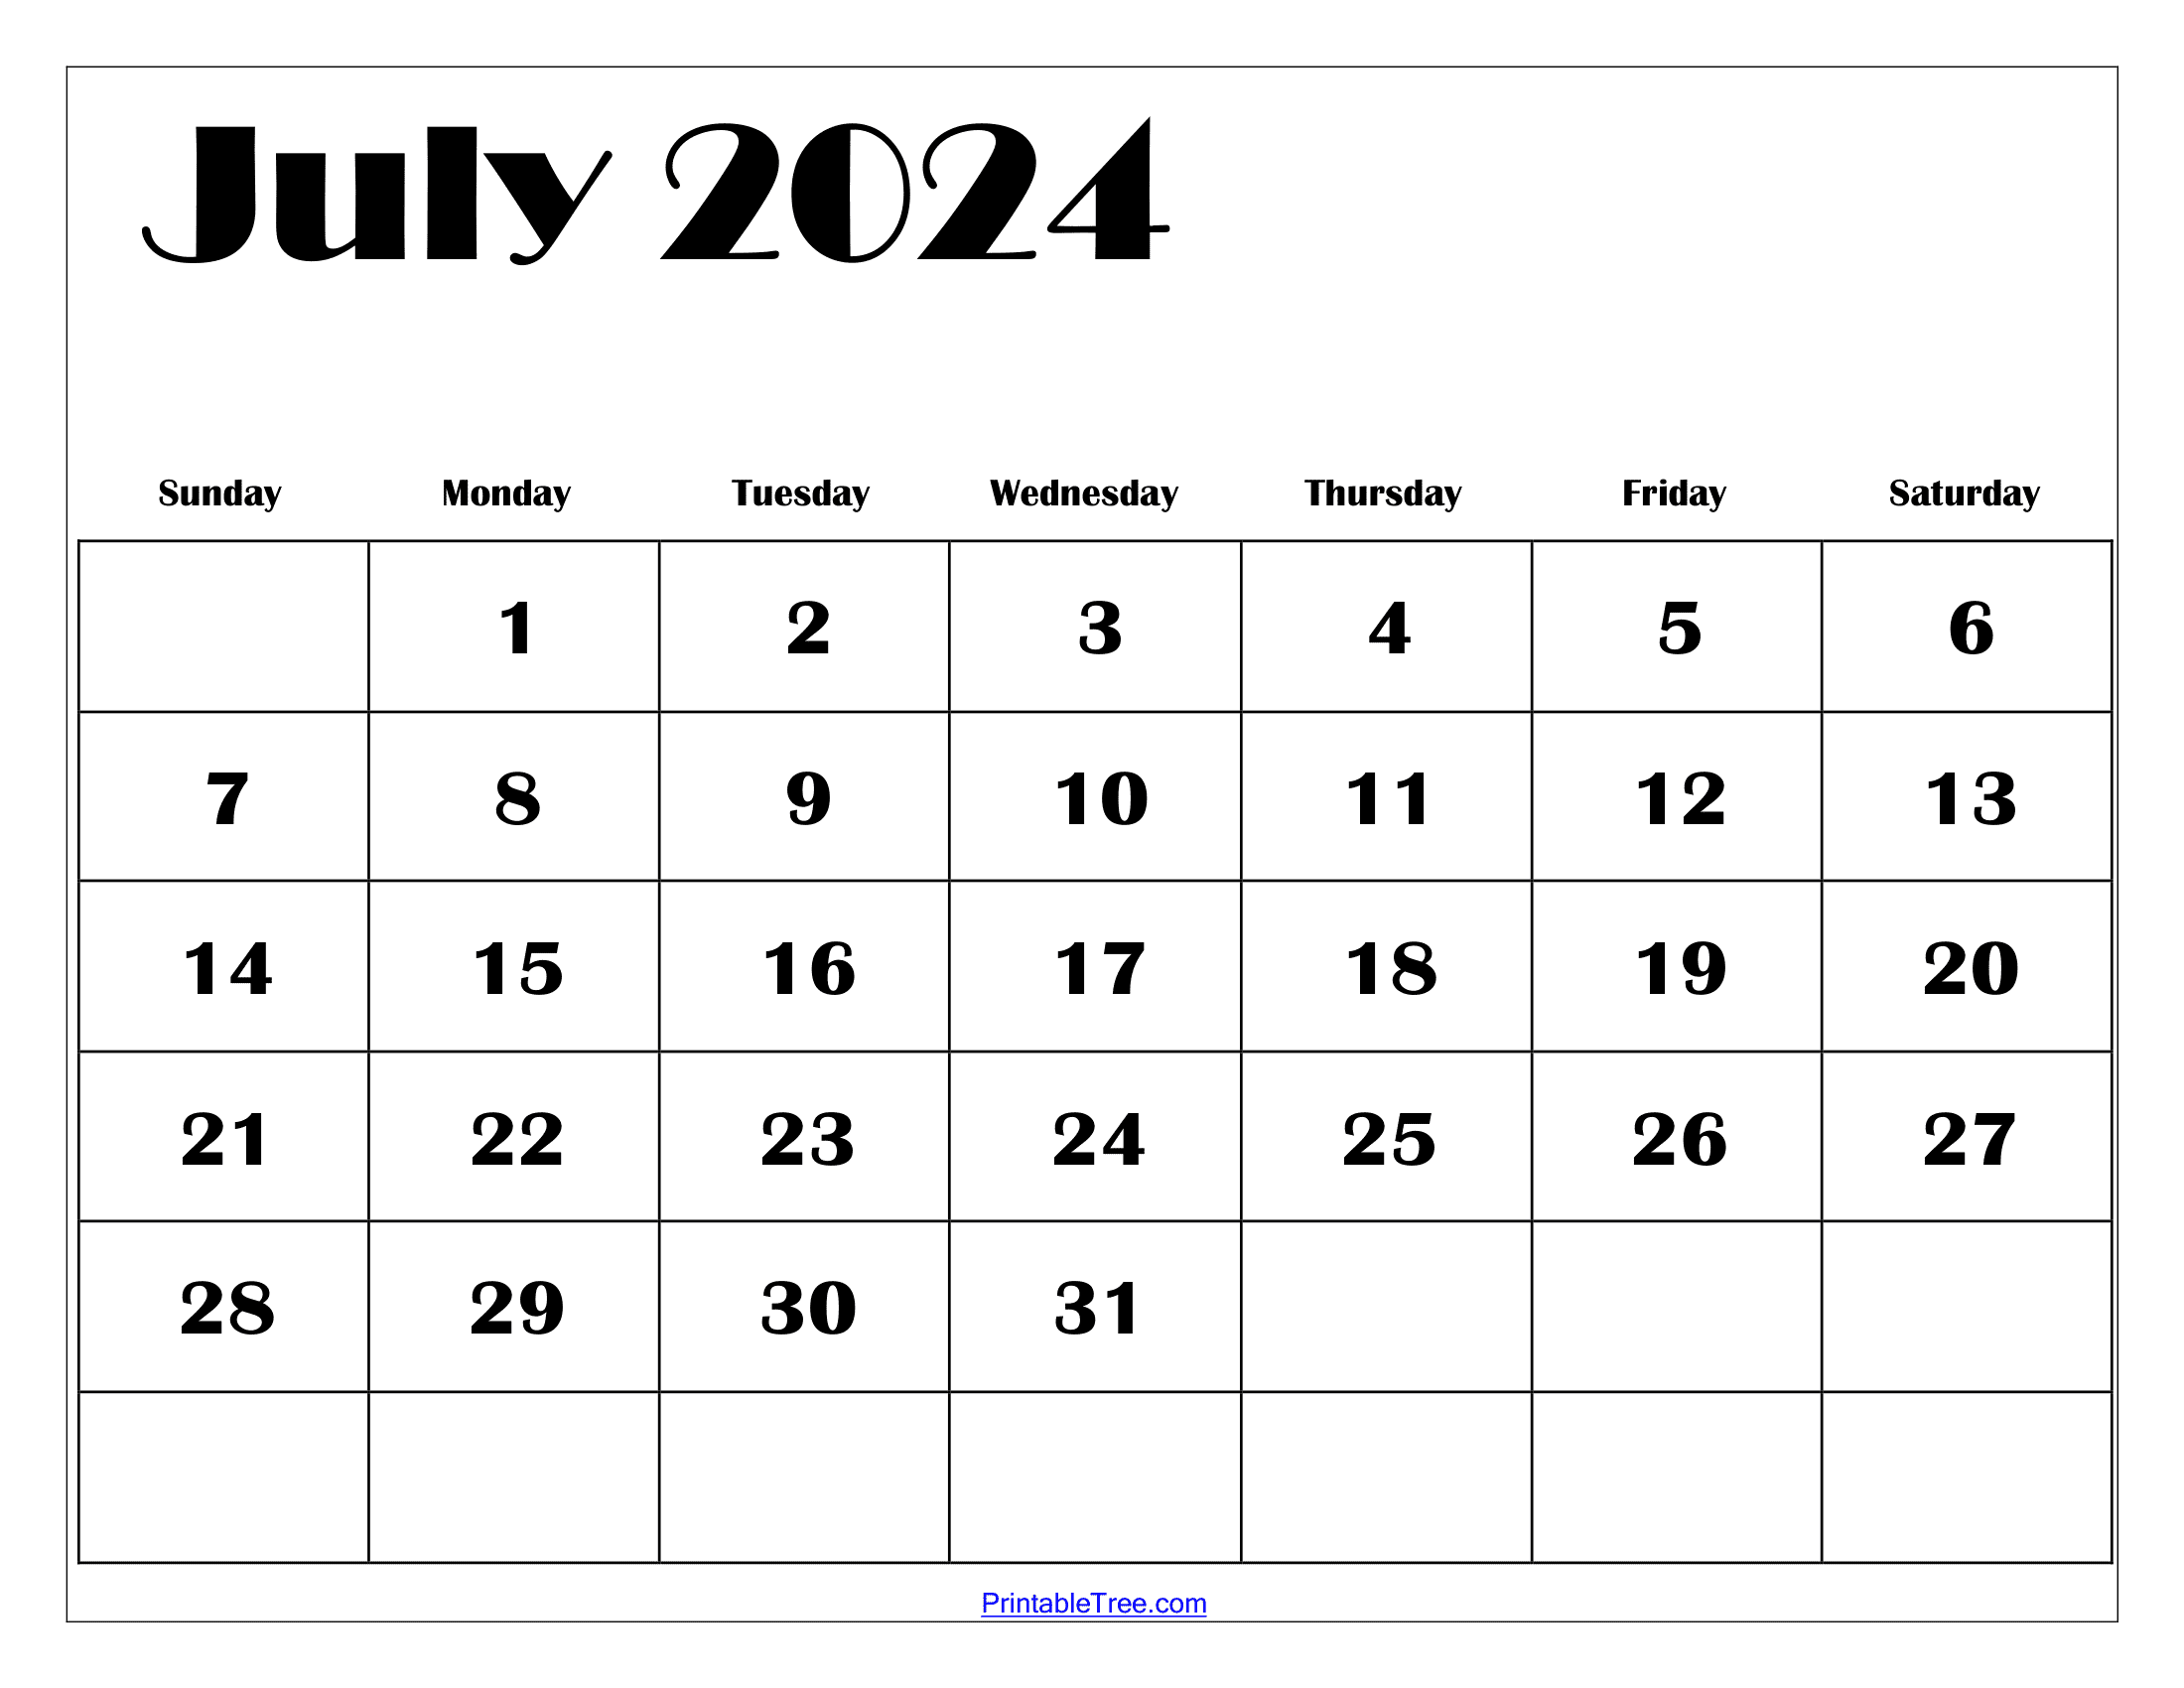 July 2024 Calendar Printable Pdf With Holidays Free Template for Free Printable Calendar May June July 2024